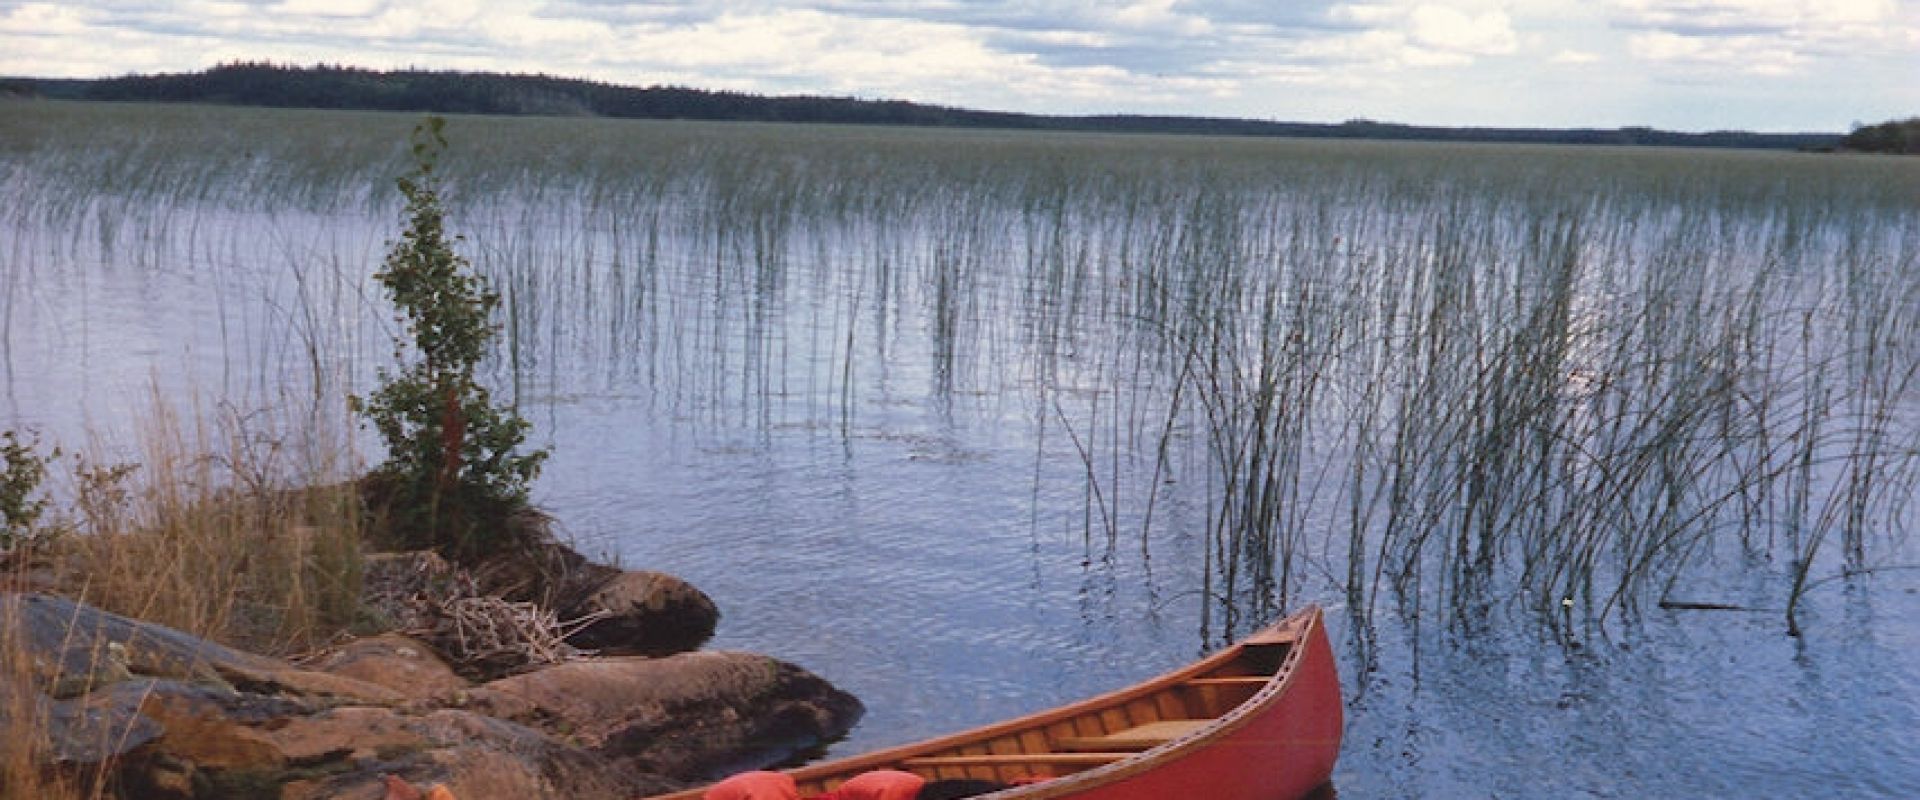 In the foreground, a red canoe sits along the rocky shoreline of Hairy Lake. Many reeds and bulrushes are visible on the lake.